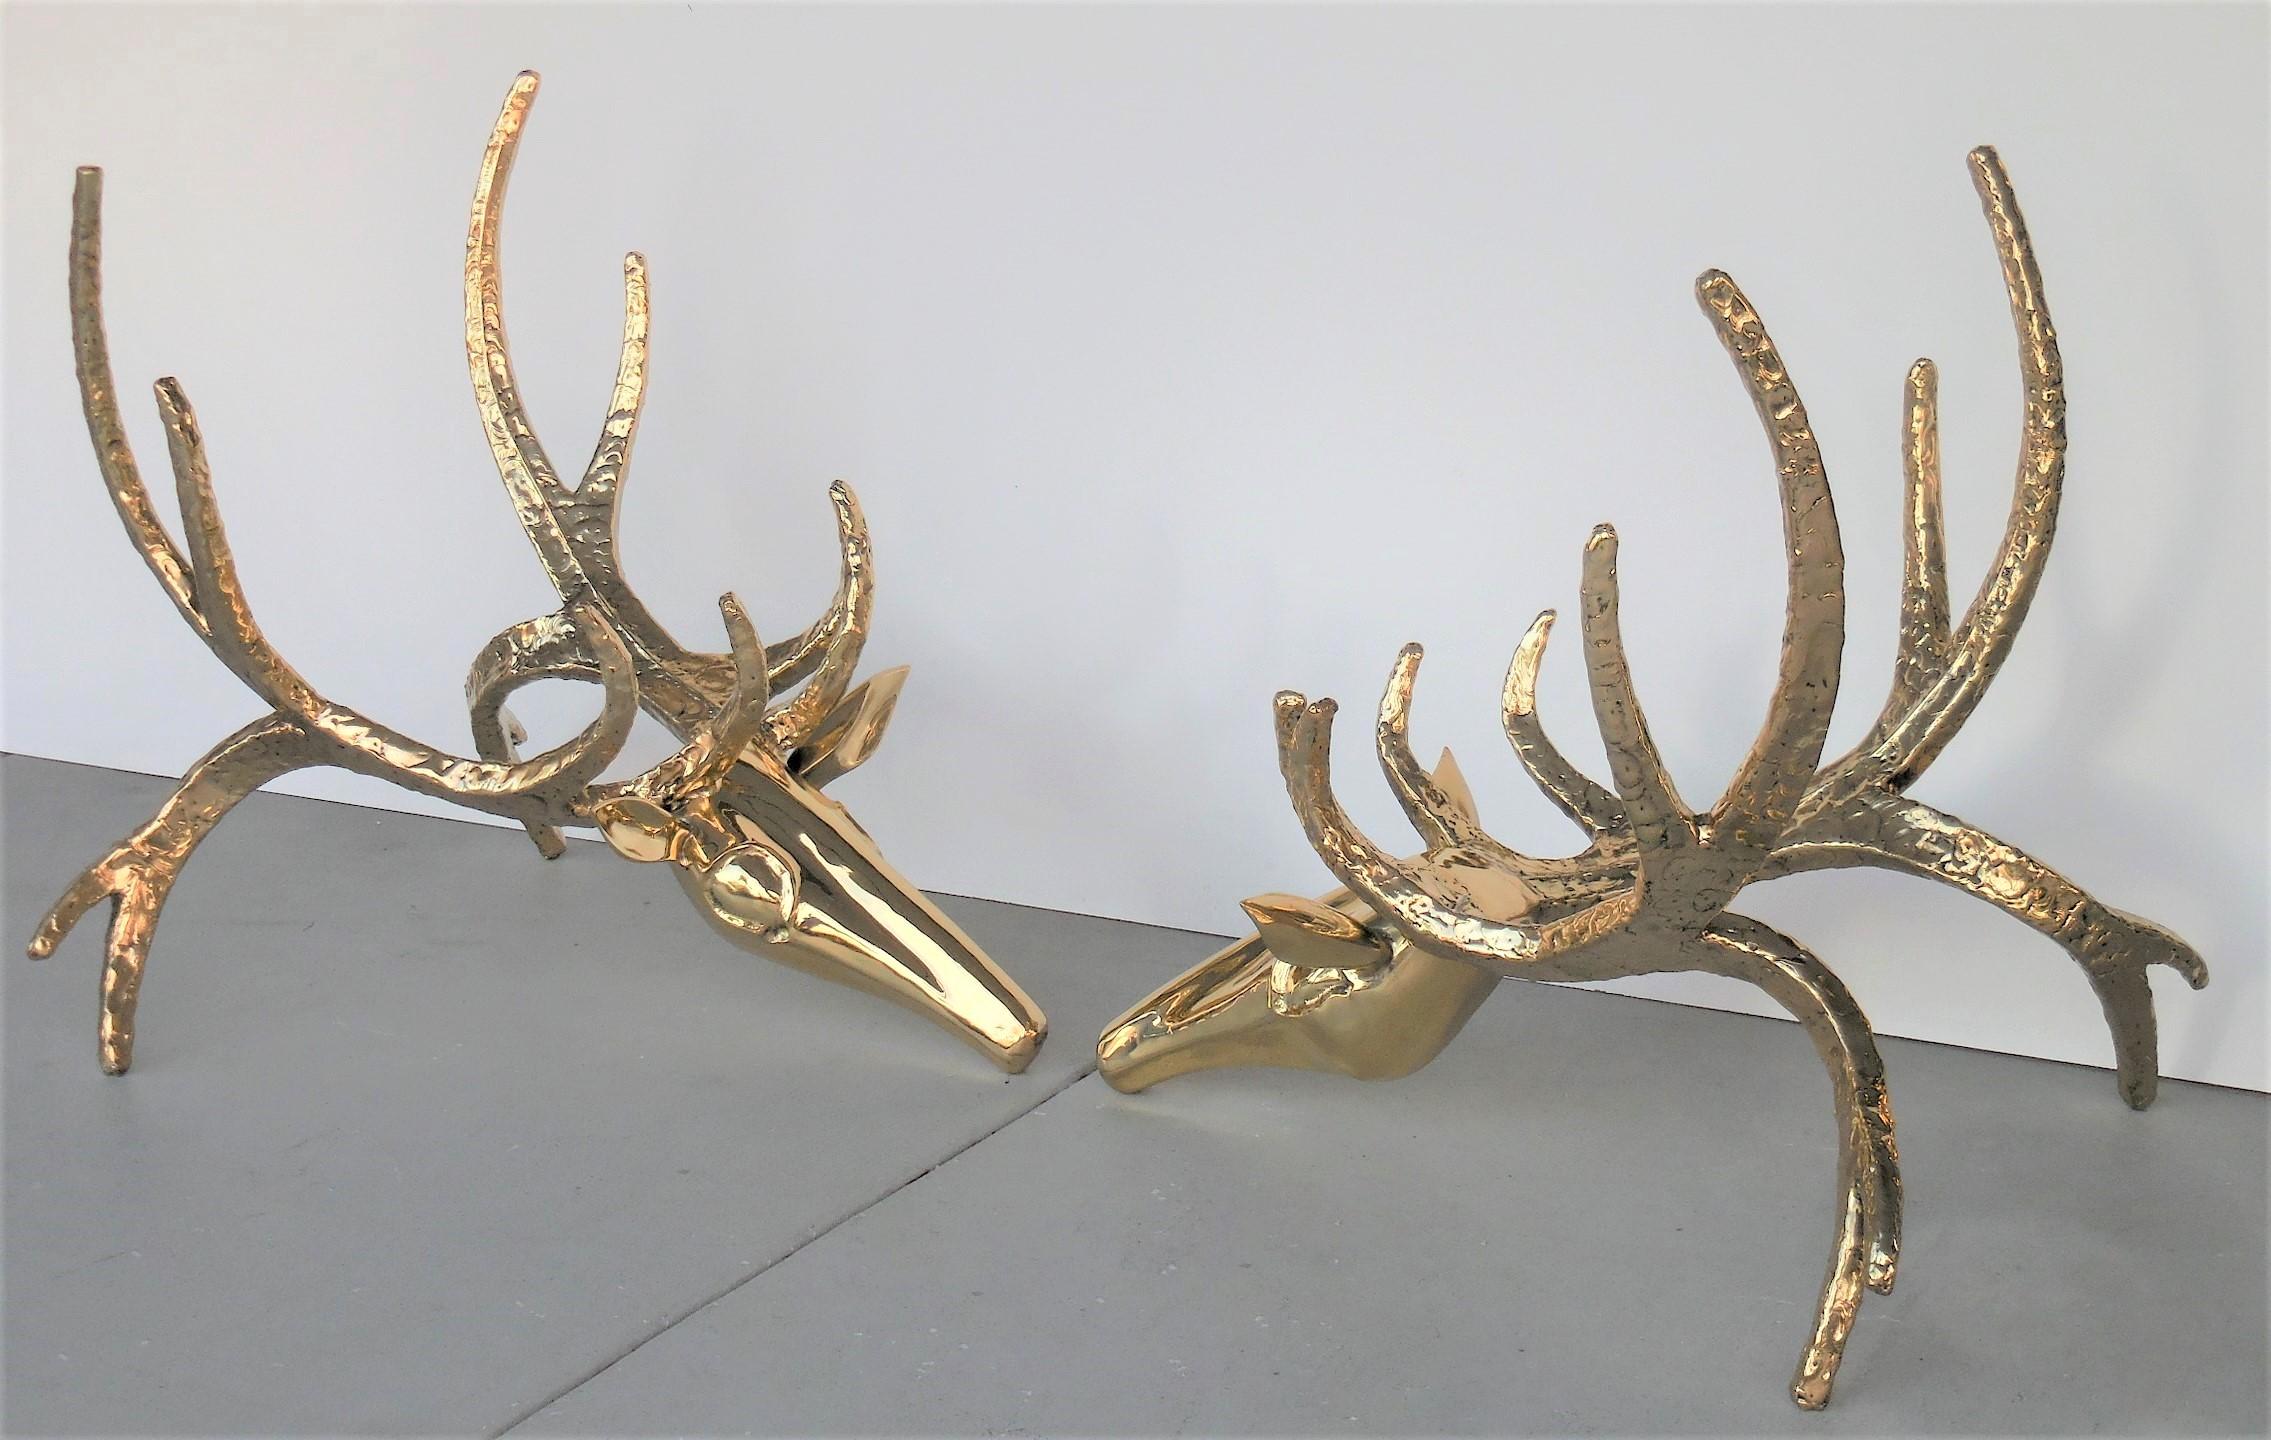 This is a rare original Alain Chervet stag head table or desk. 2 large stylized and hand-sculpted heads support a glass top. Both are signed and dated. Presented with a 72